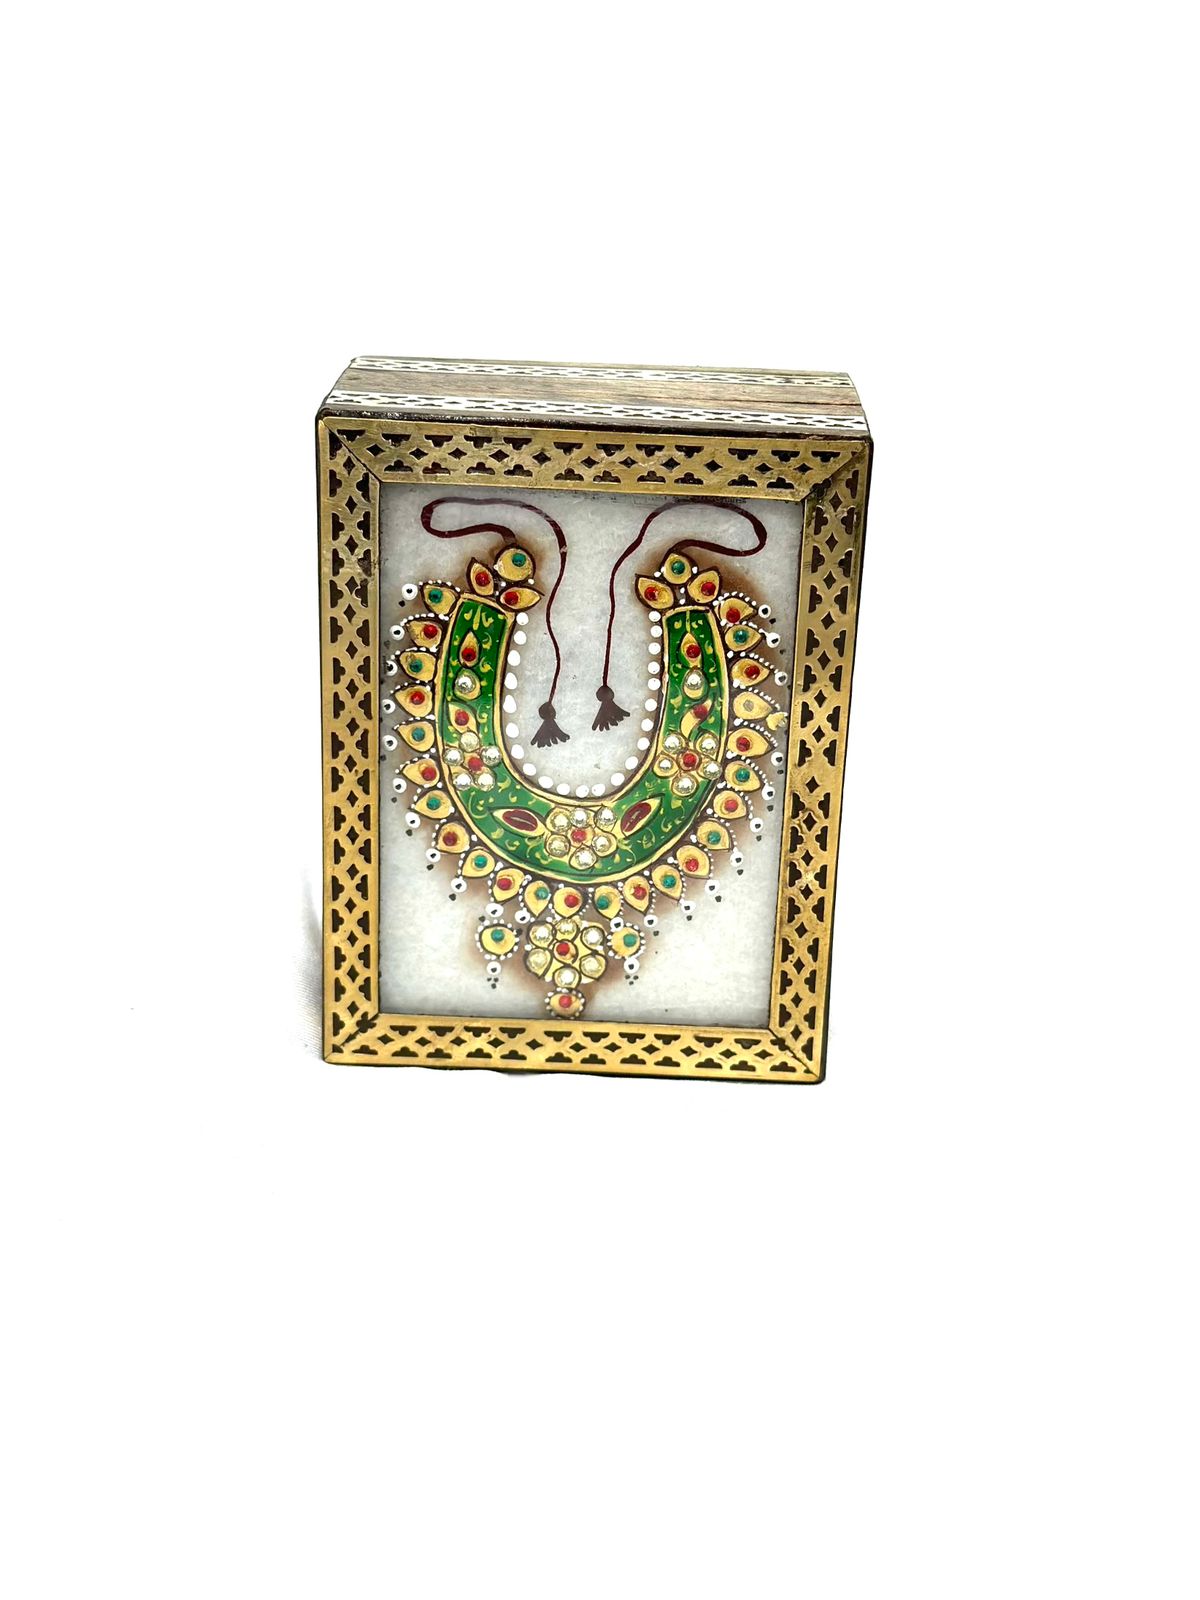 Marble Designer Royal Jewelry Wooden Box Storage Gifting's By Tamrapatra